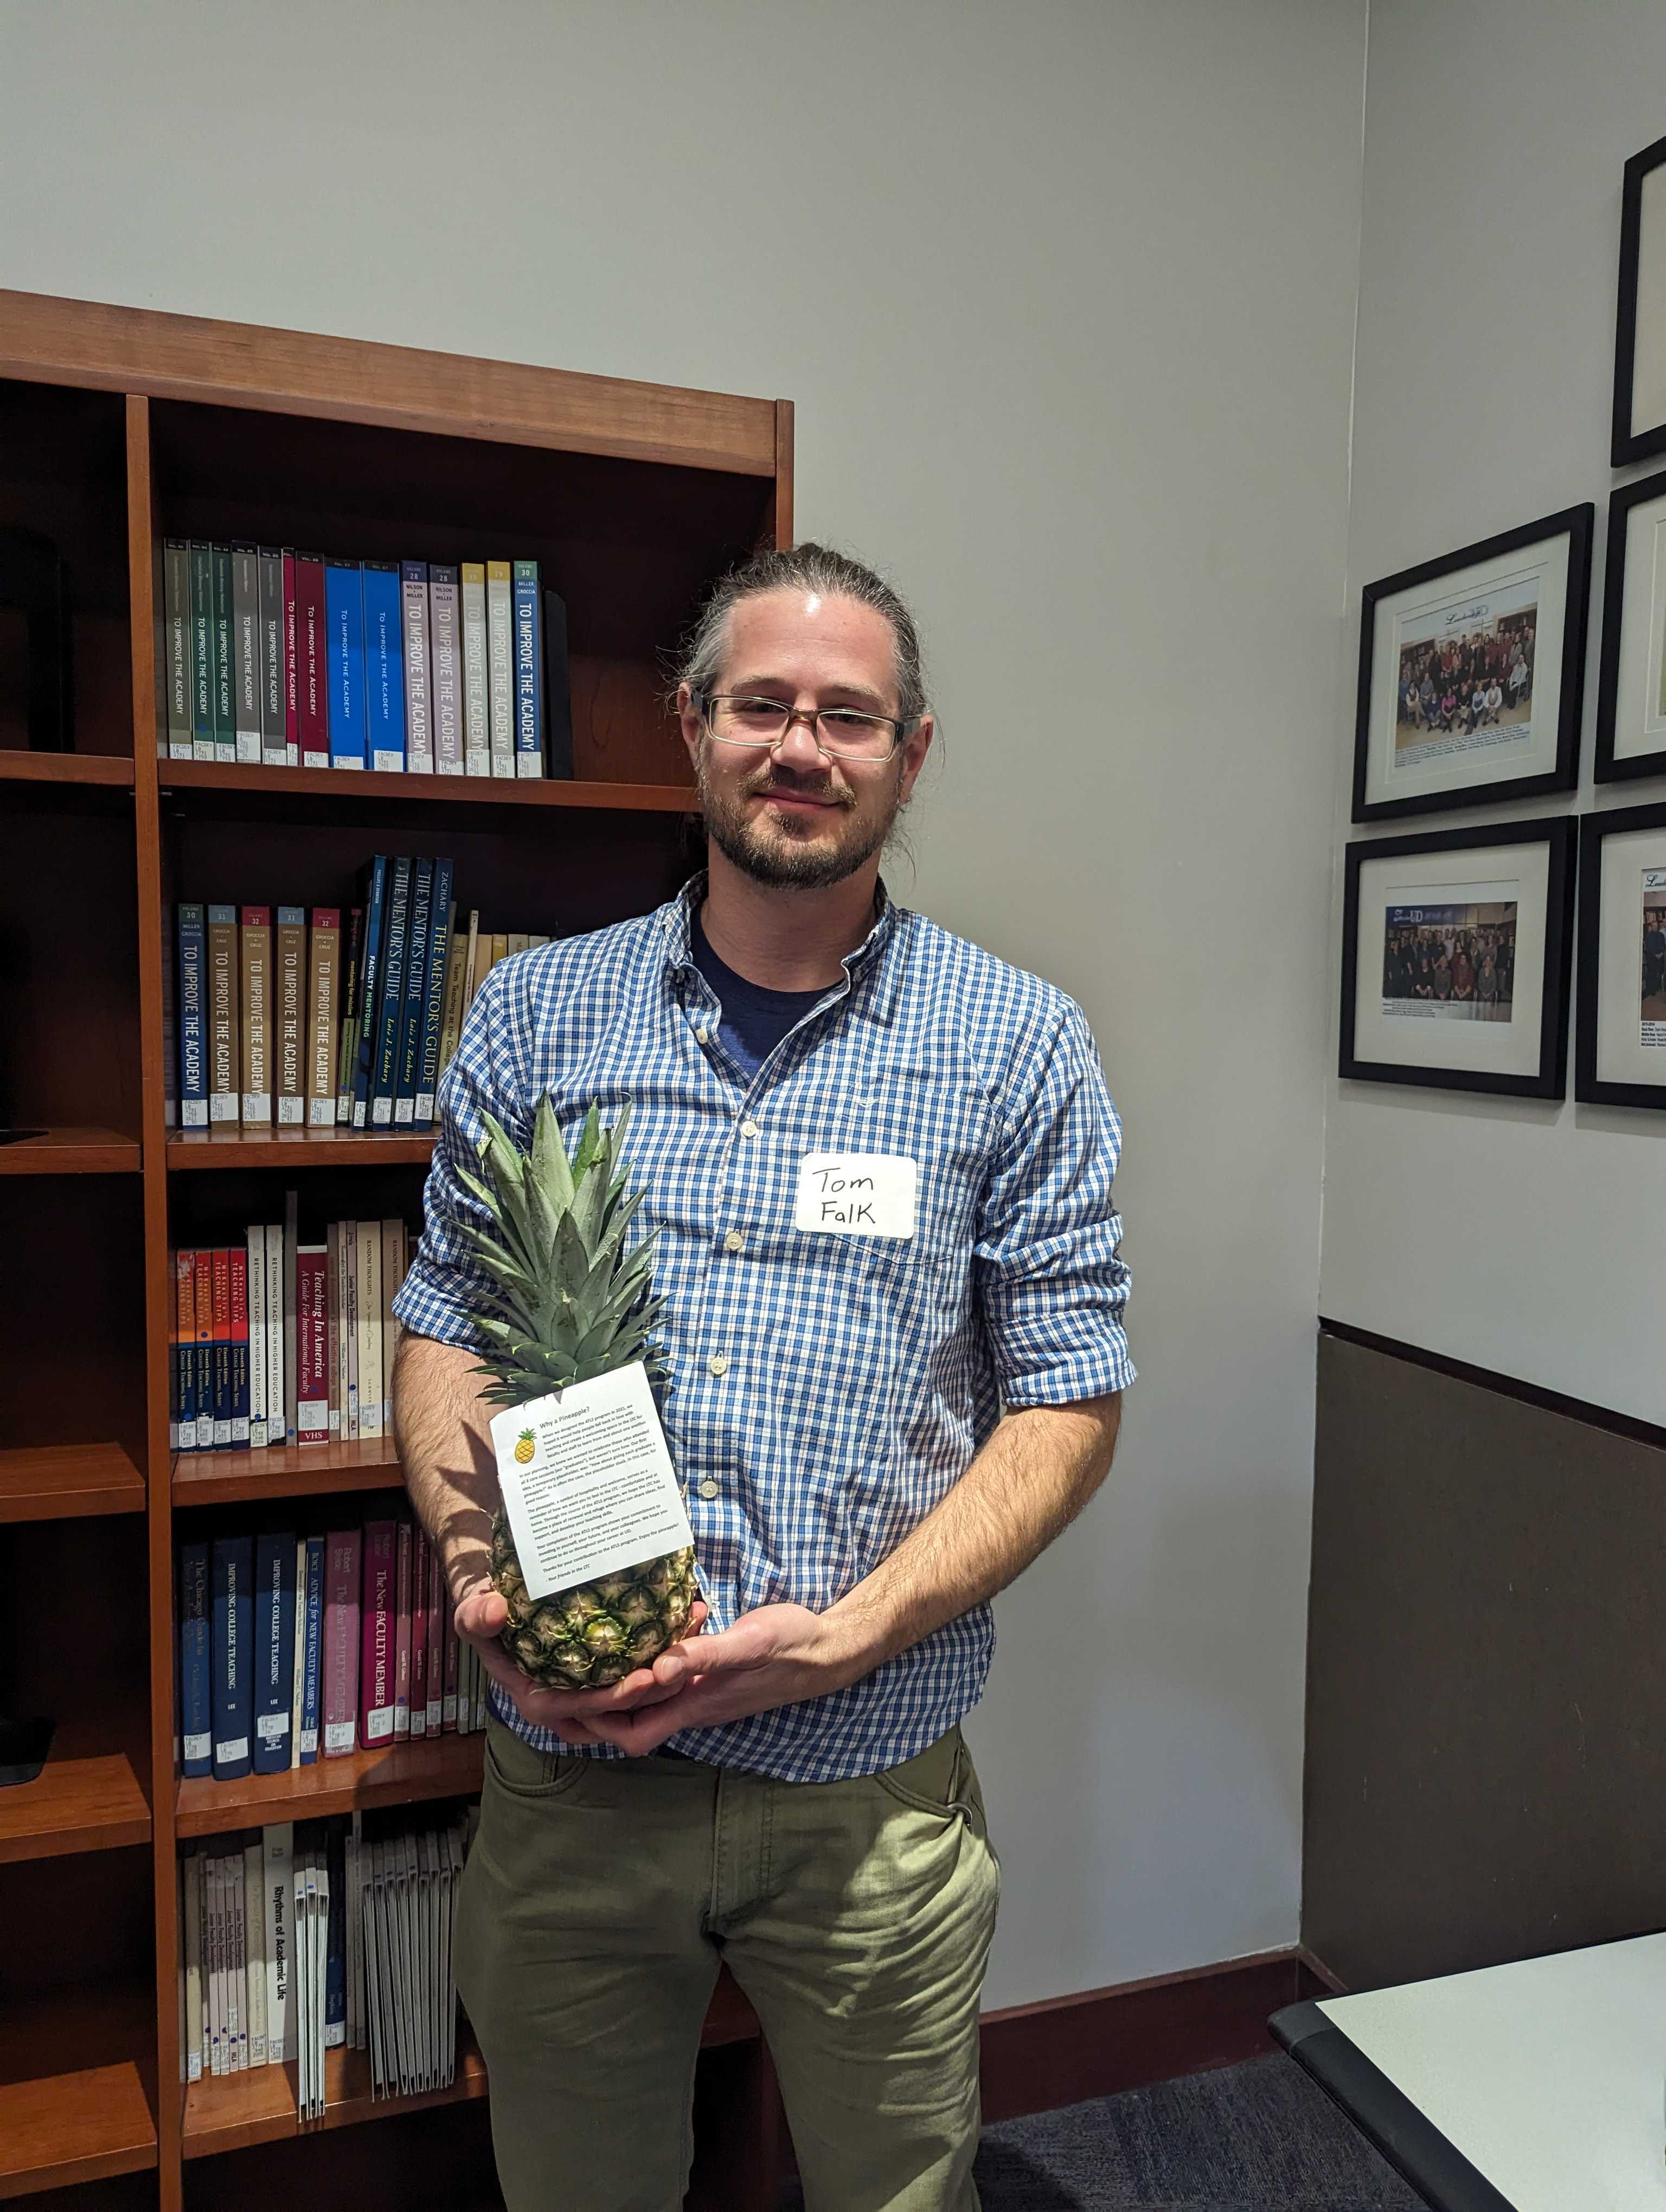 Faculty member Thomas Falk poses with a pineapple to signify graduation from ATLS.